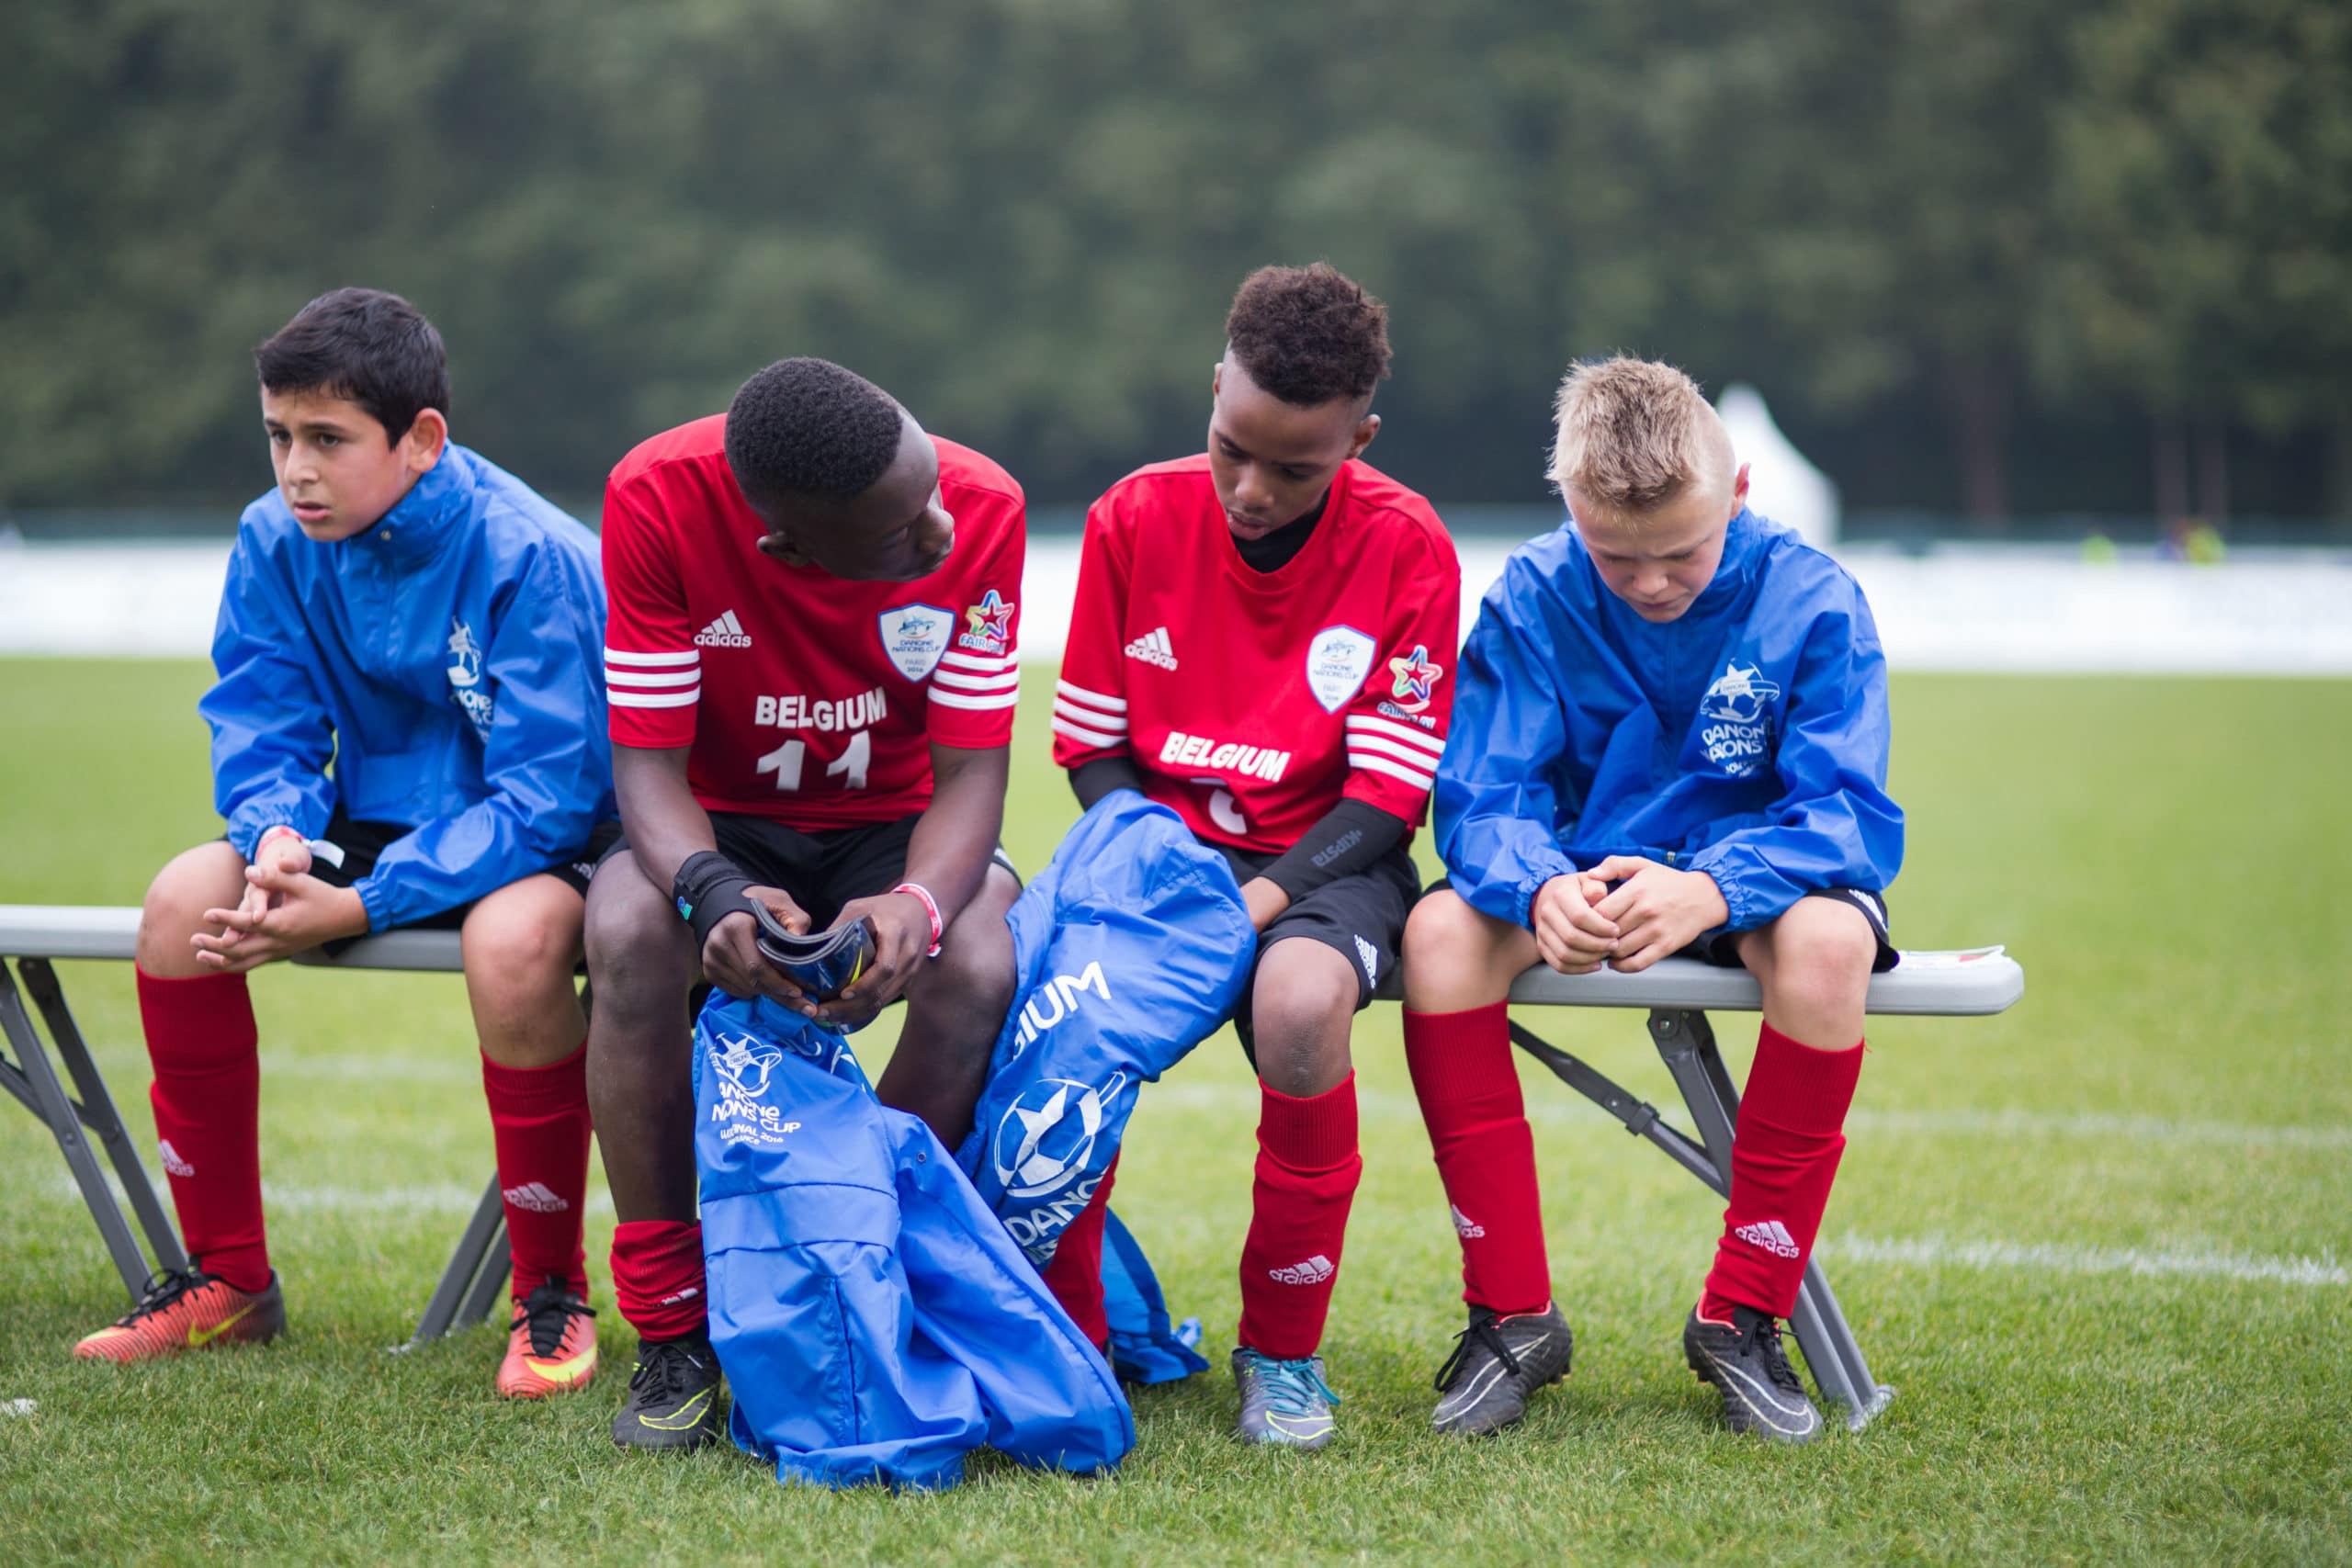 The manager is only giving the subs 10-15 minutes – is this acceptable? -  Coaching Advice - Soccer Coach Weekly